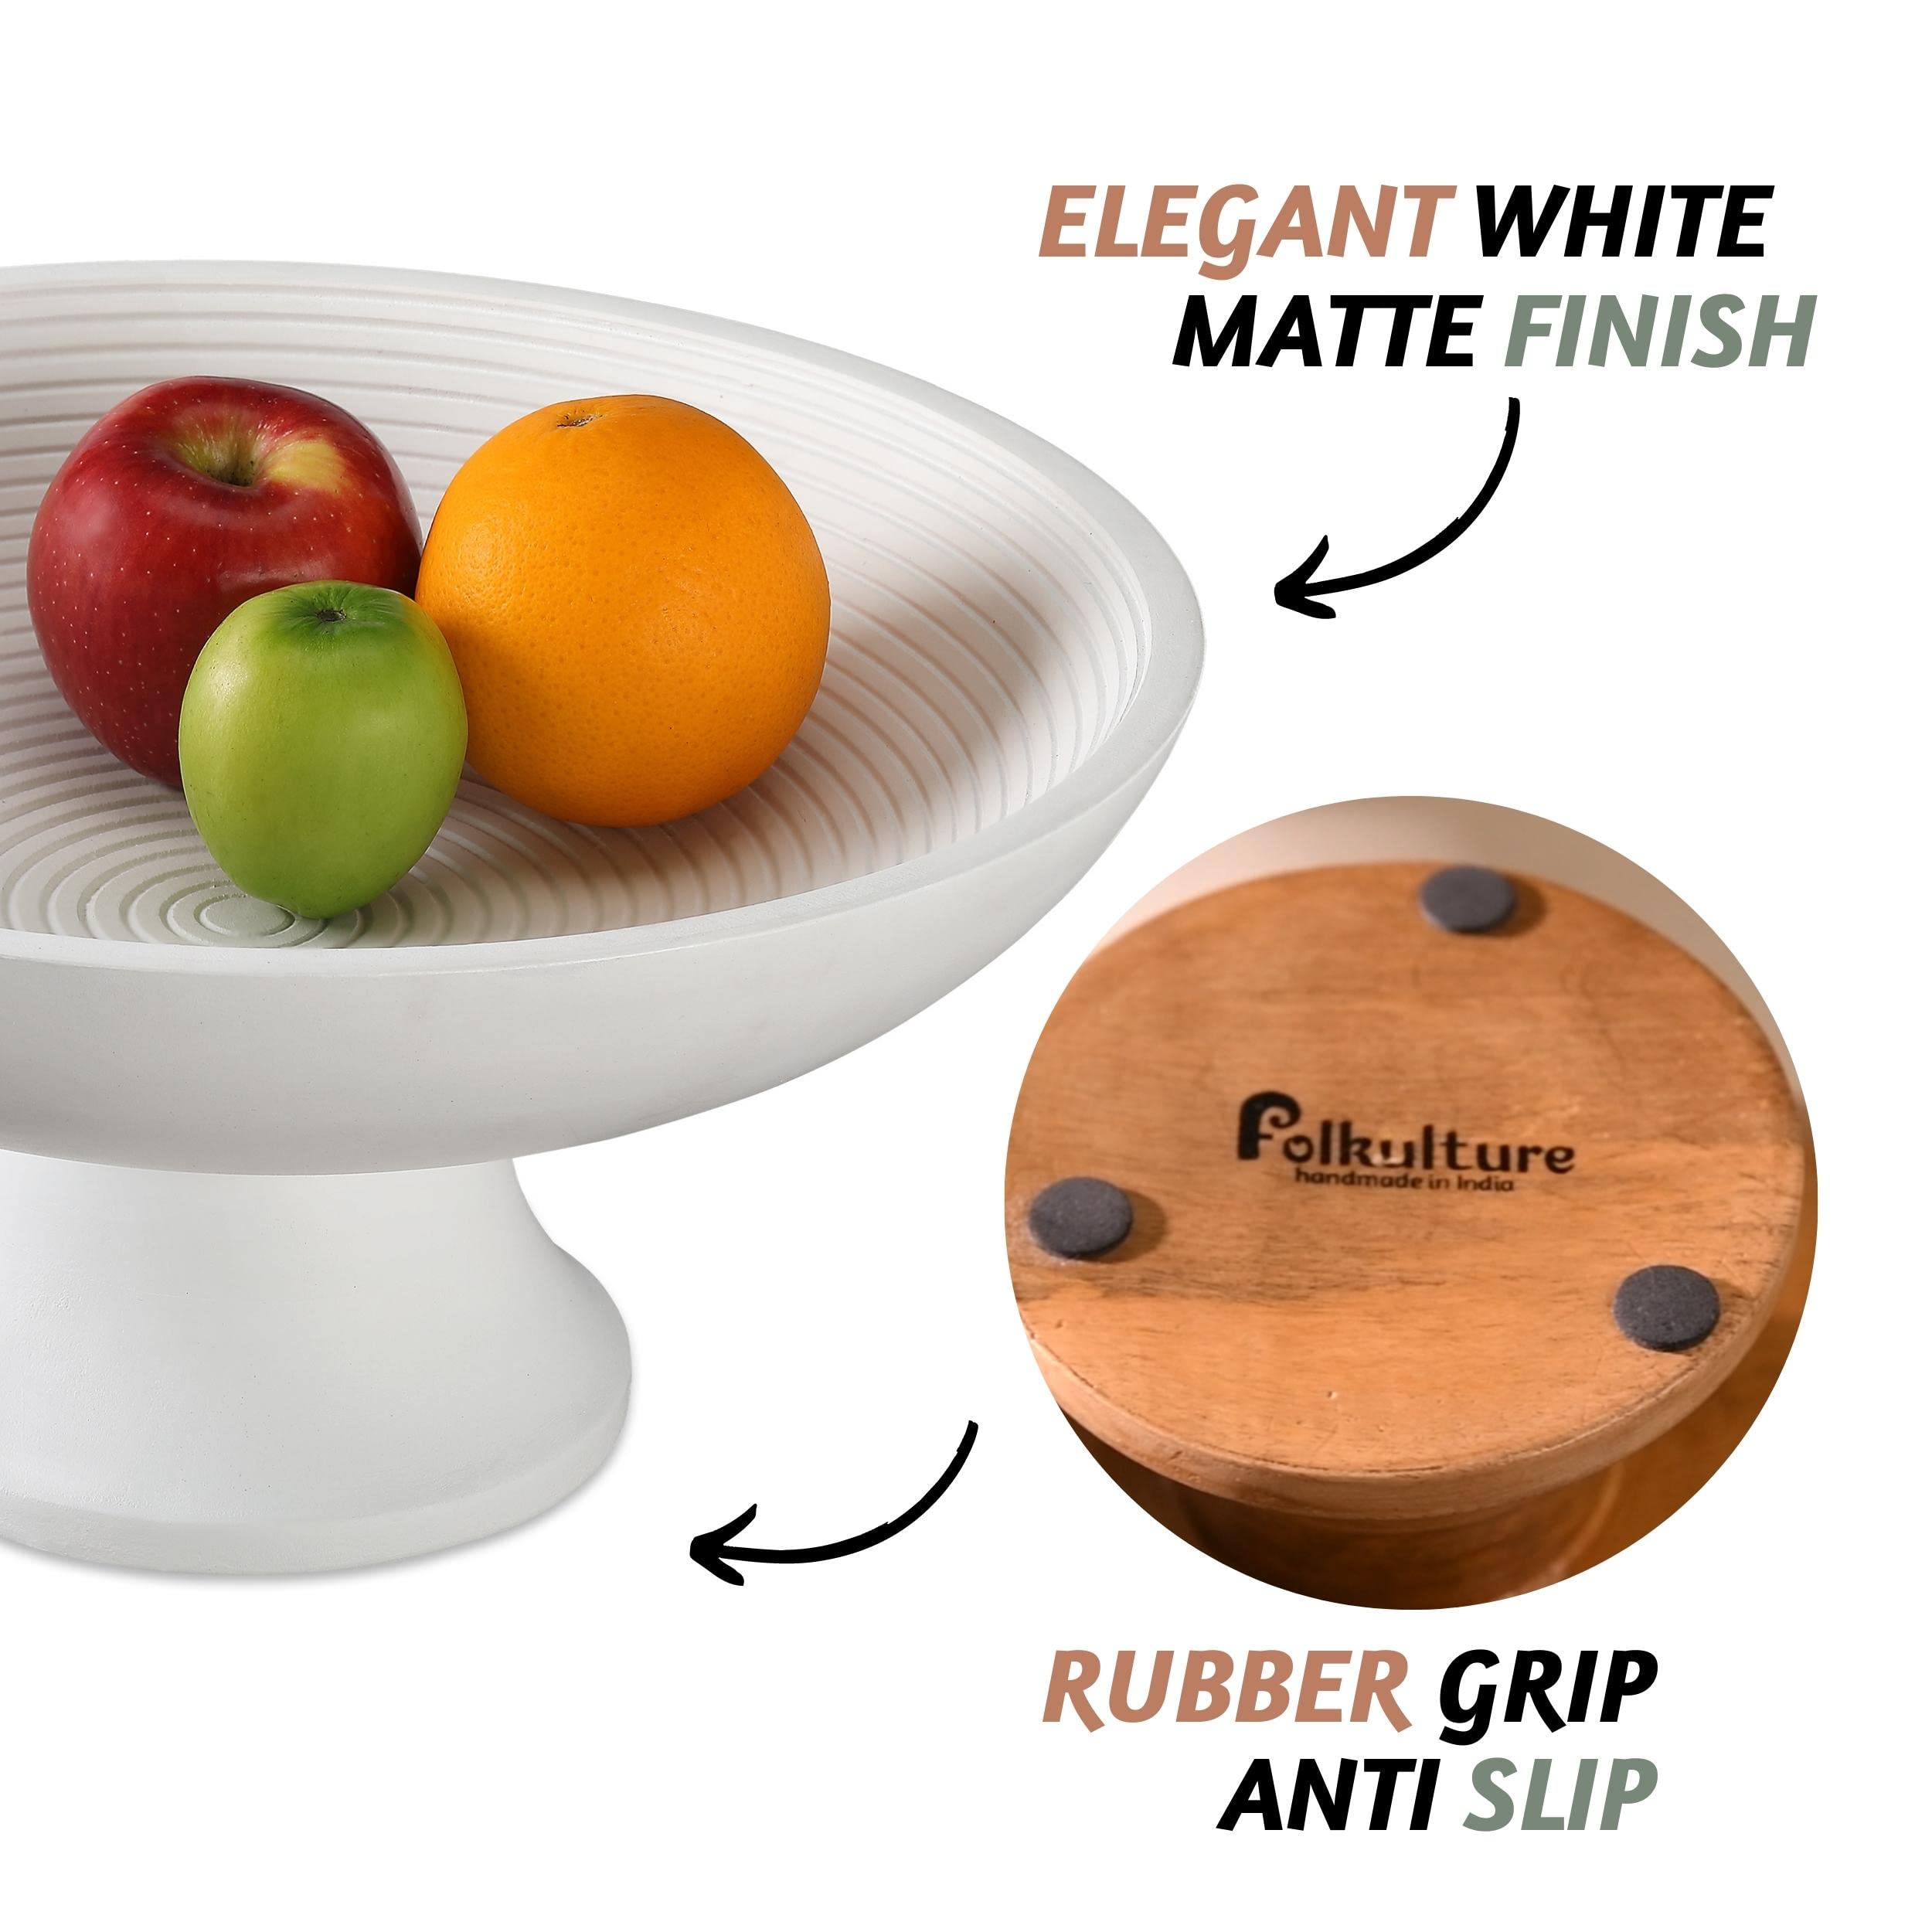 Folkulture Wood Fruit Bowl or Decorative Pedestal Bowl for Table Décor, Wooden Fruit Bowl for Kitchen Counter or Farmhouse Table Centerpiece, 12-inch Large Bowls for Breads, Mango Wood (White Rib)